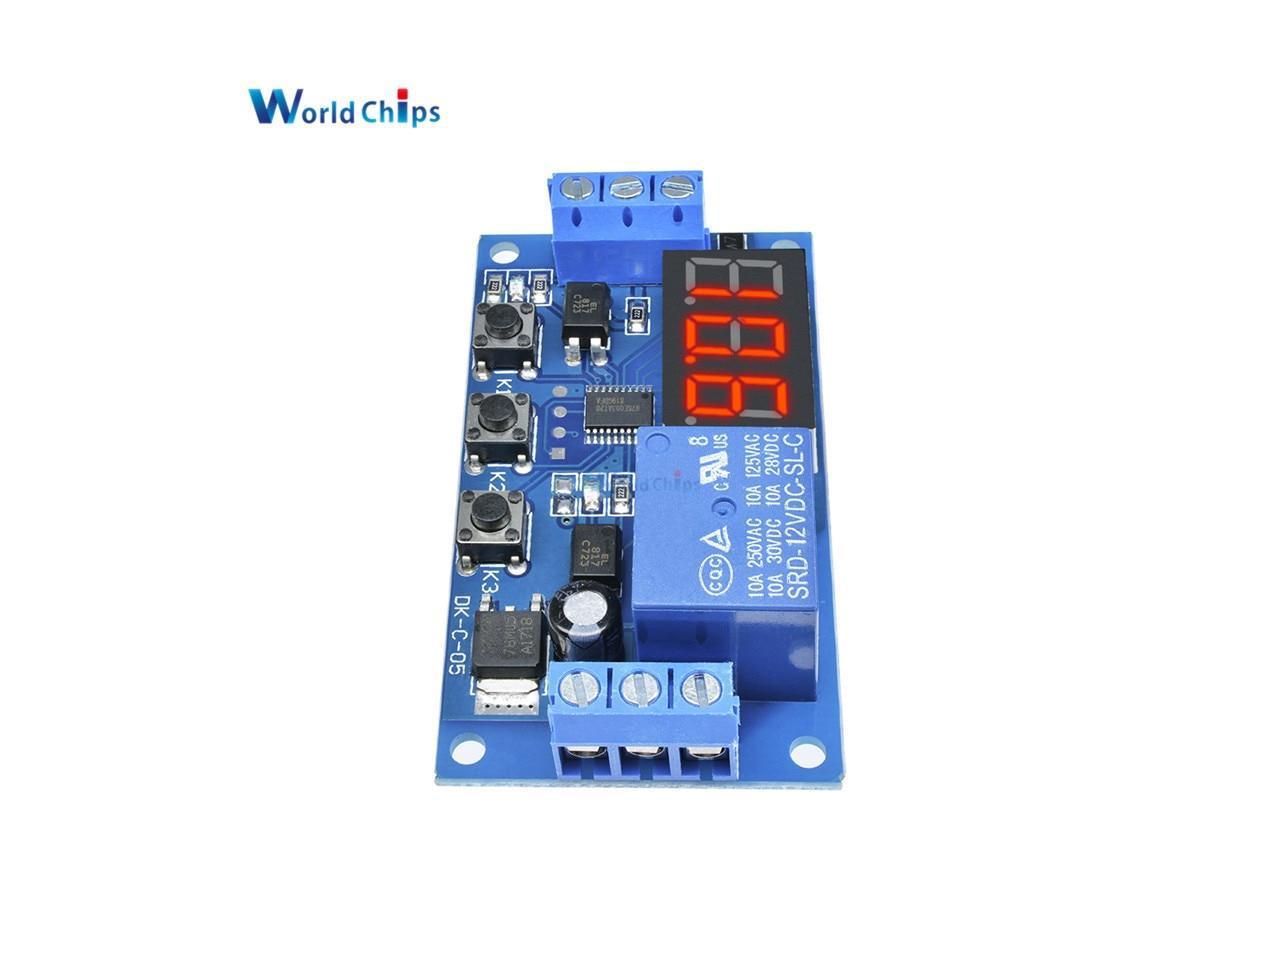 SMAKN Two DC motor-driven development board with 2.4G Bluetooth xbee seat for Arduino 